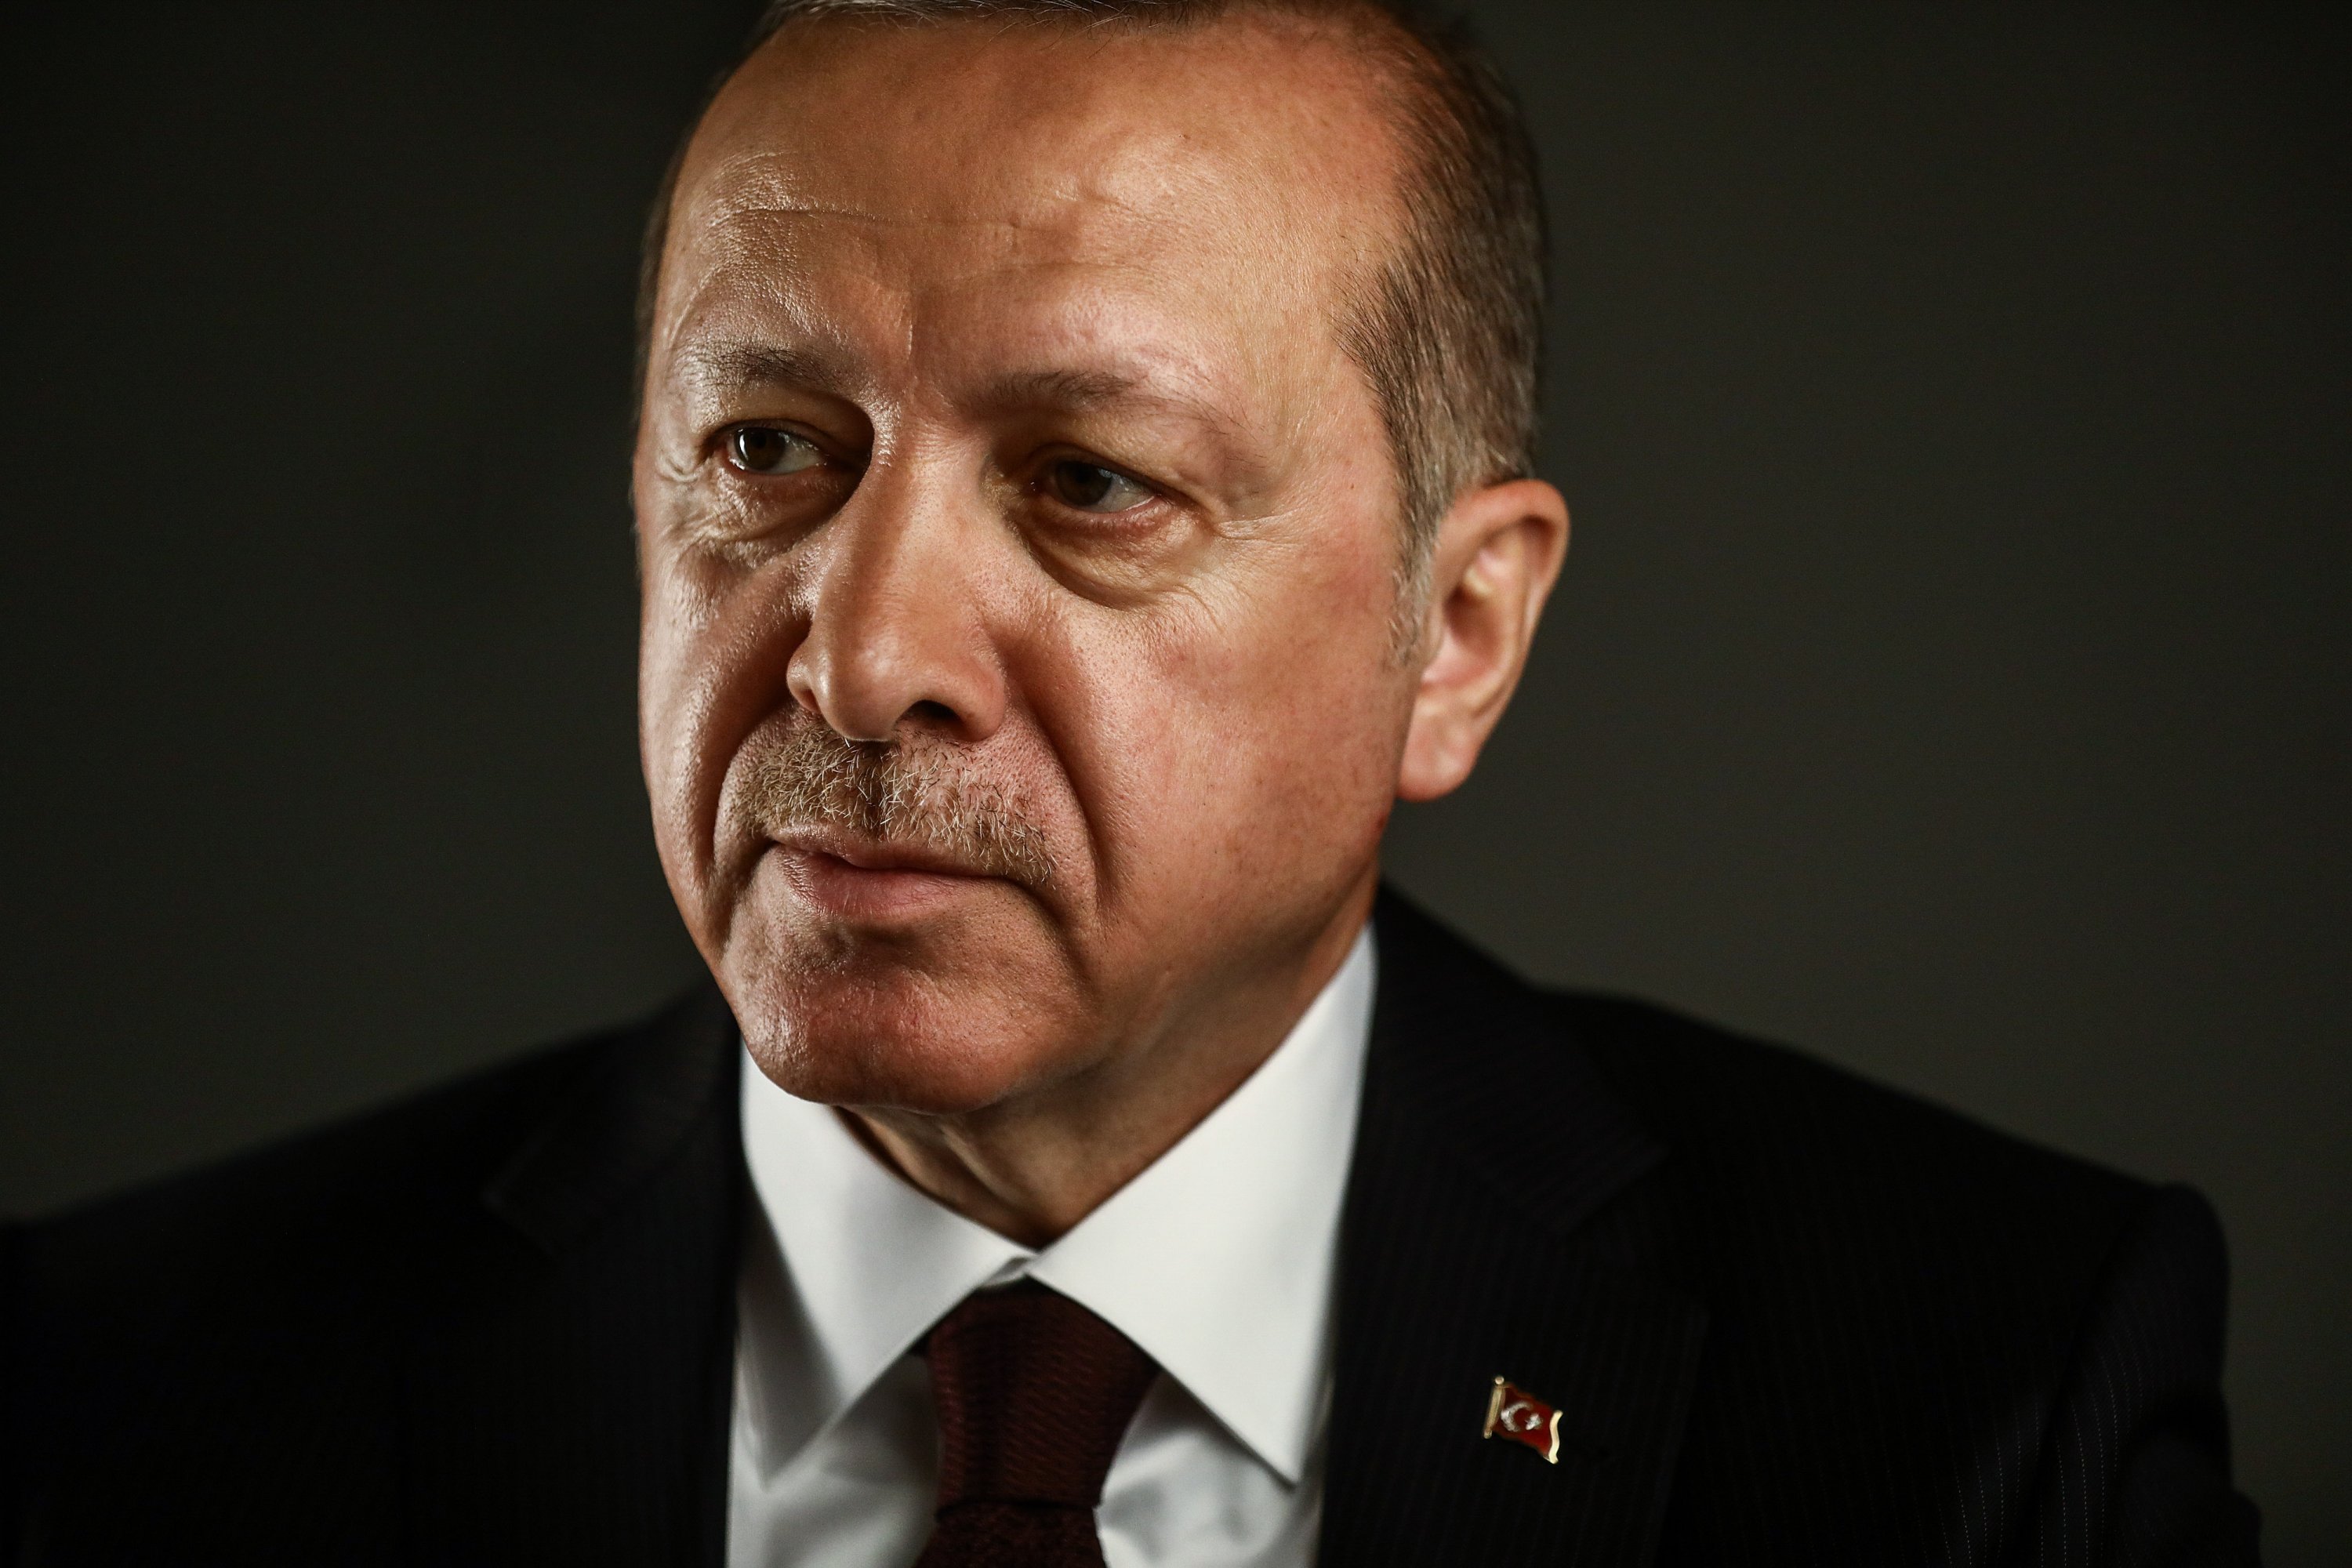 President Recep Tayyip Erdoğan poses for a photograph following a Bloomberg Television interview in London, U.K., May 14, 2018. (Getty Images Photo)